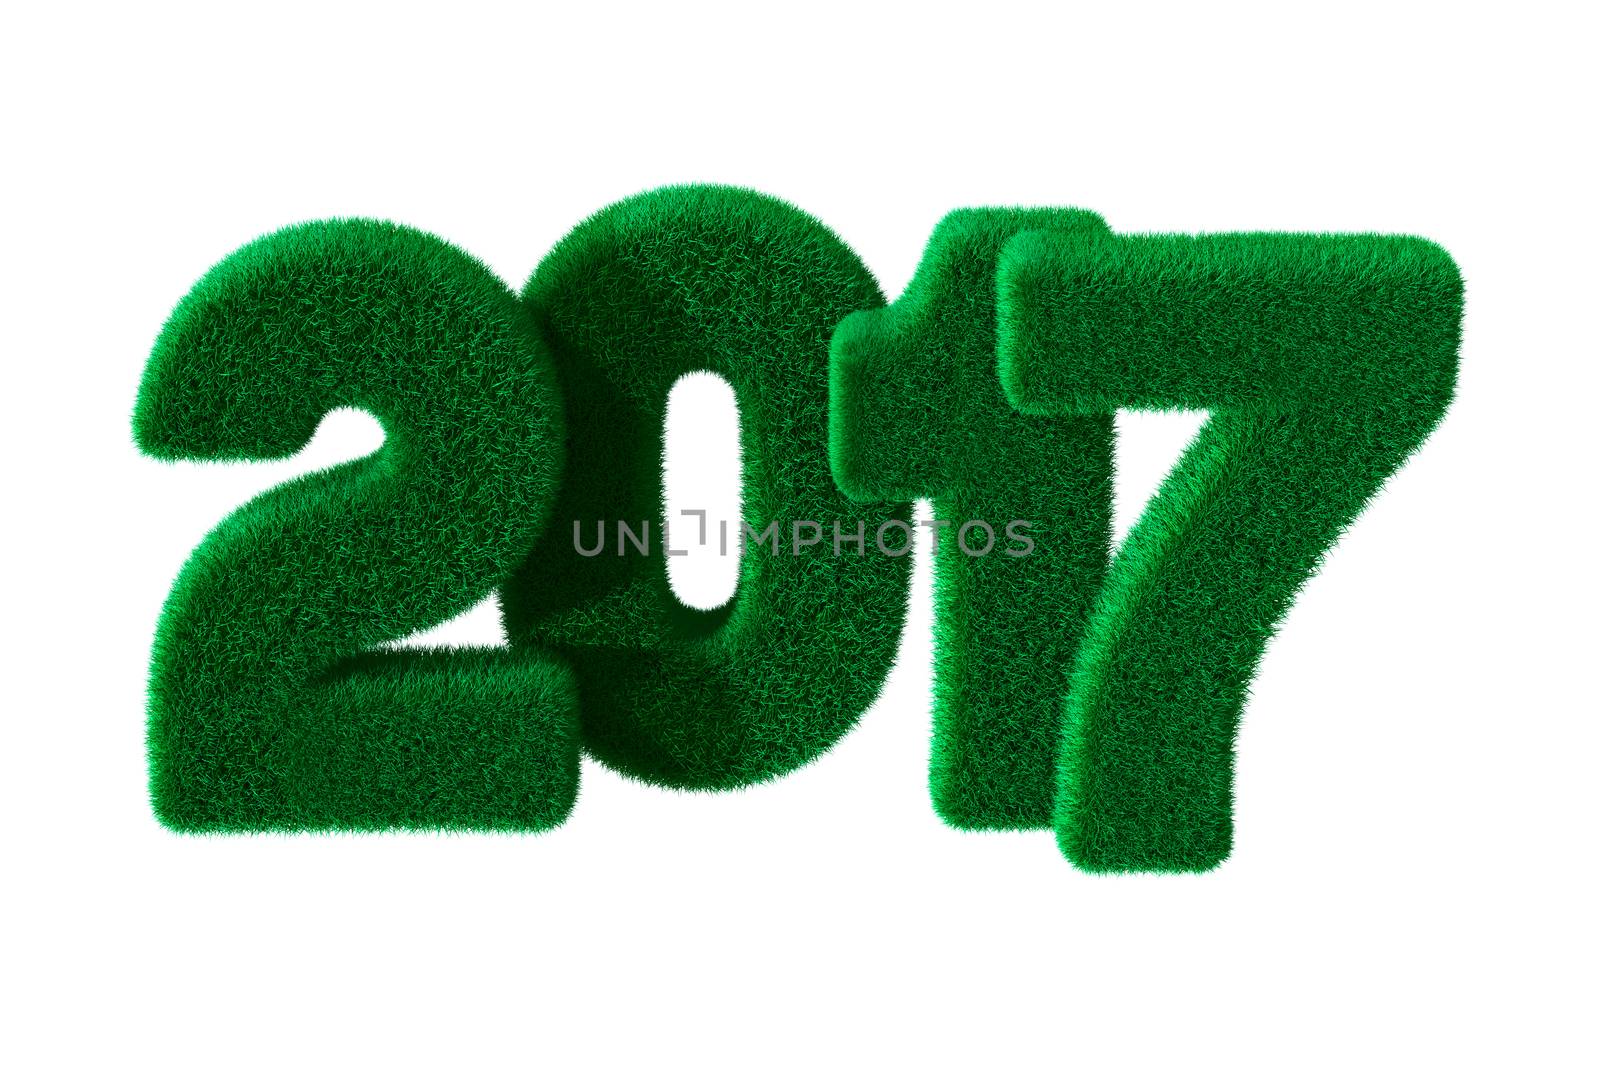 2017 year from grass. Isolated 3D image